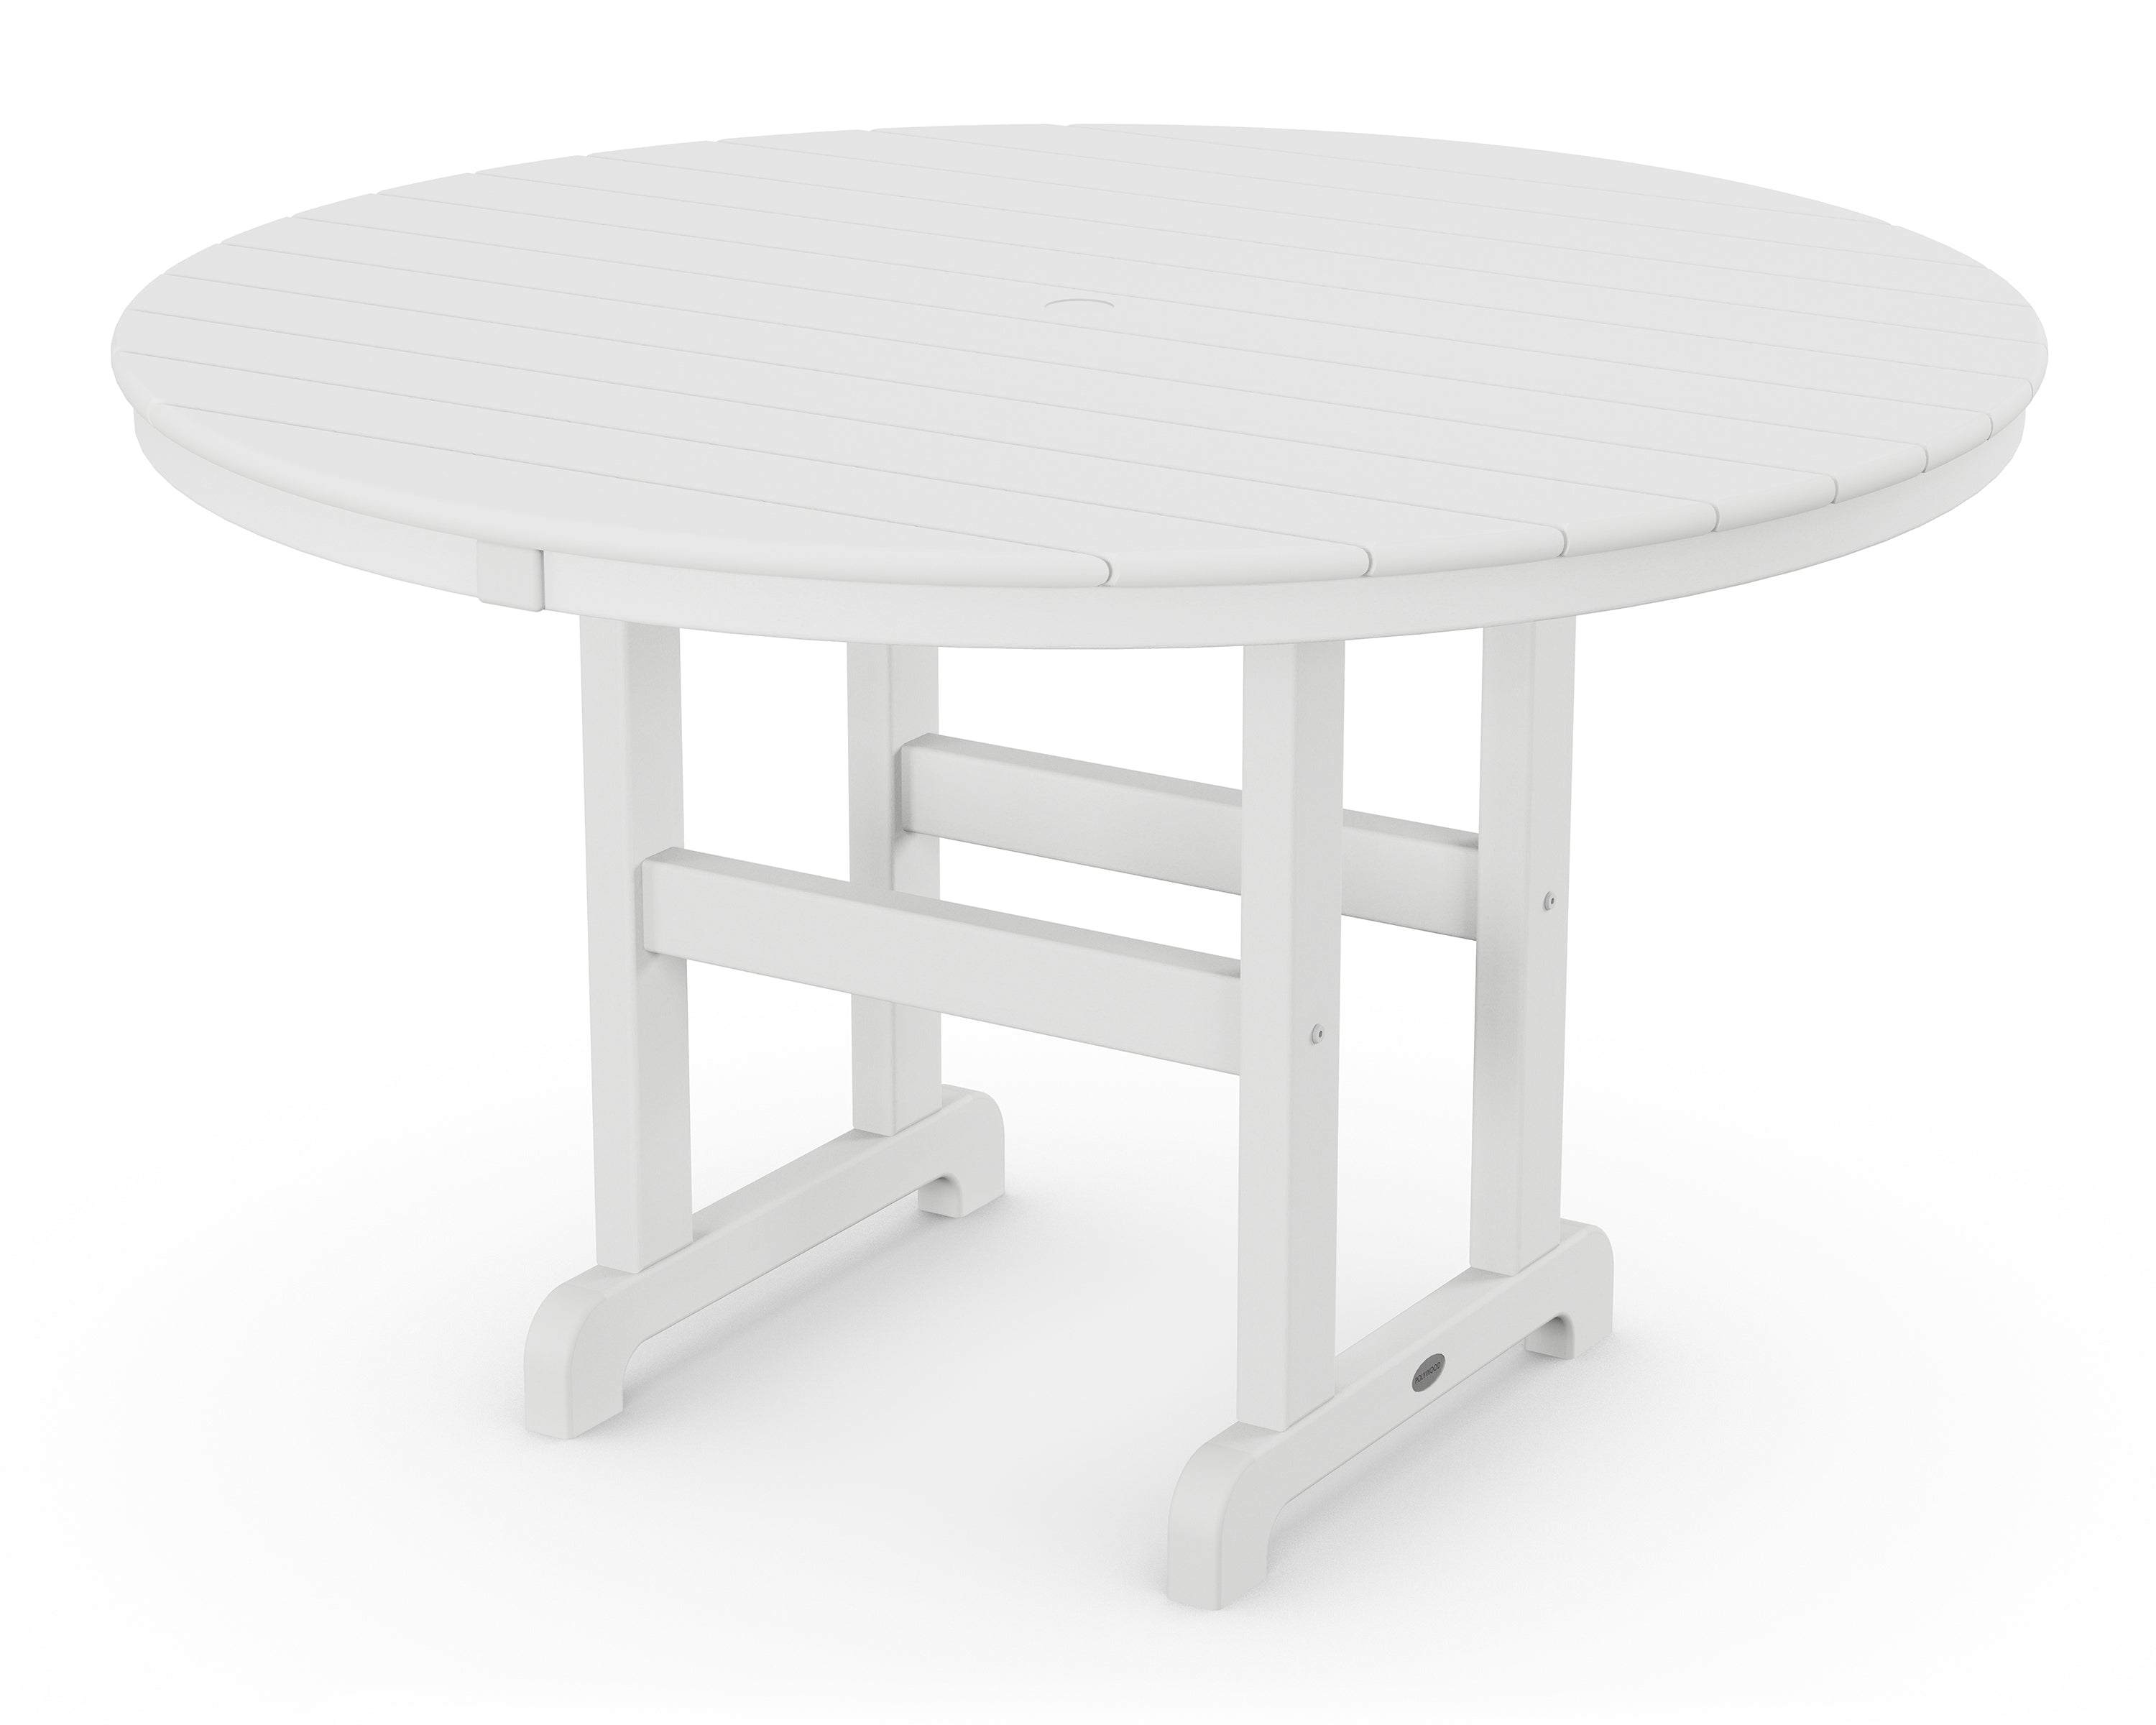 POLYWOOD 48 inch Round Farmhouse Dining Table Outdoor Tables White 12039480